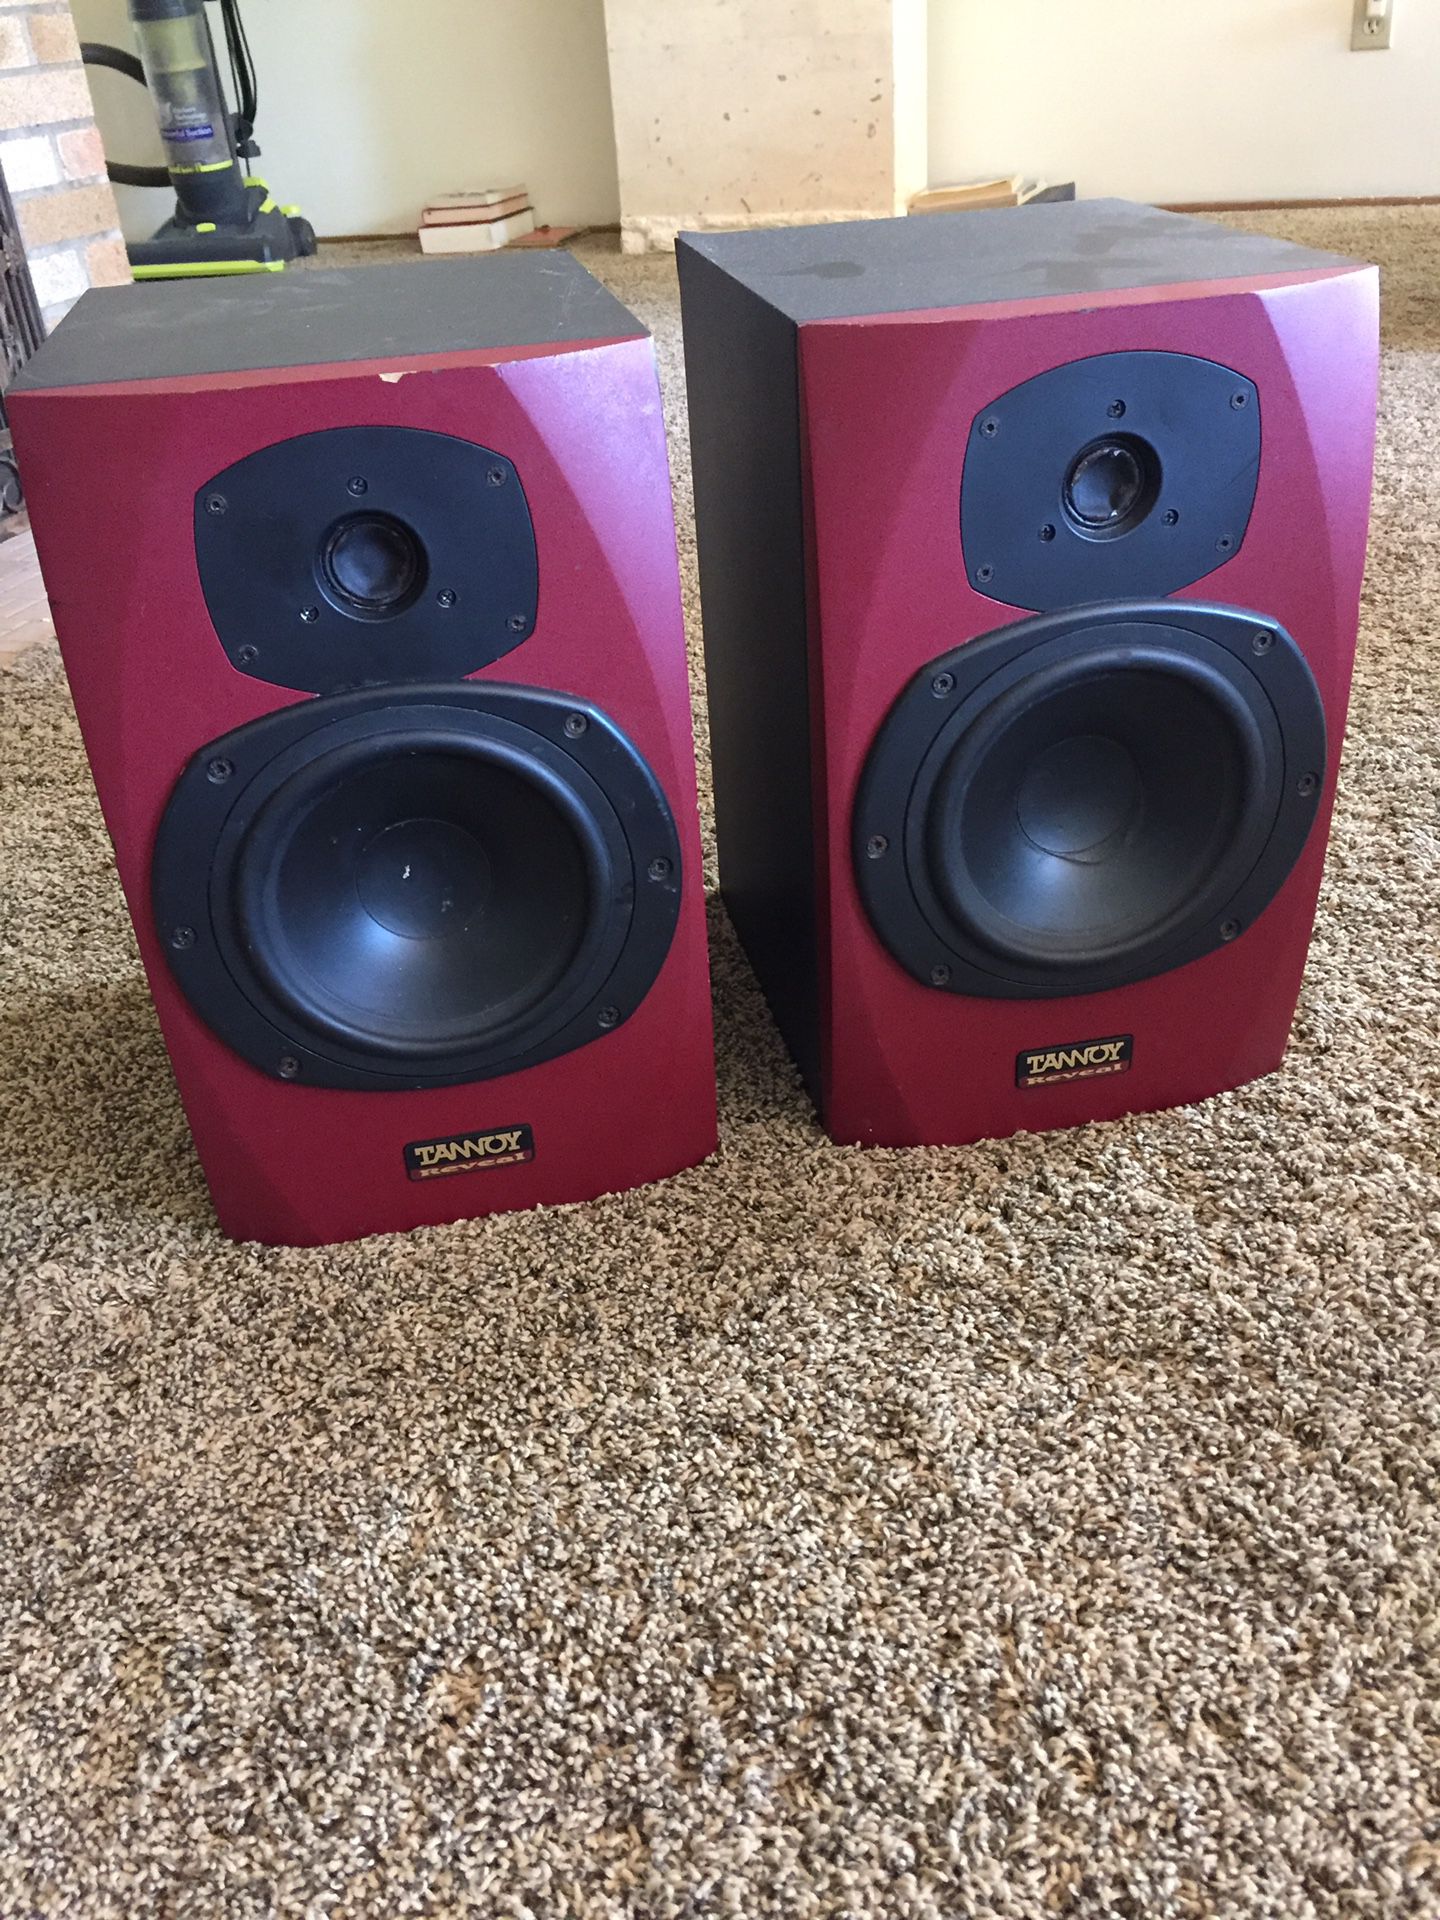 Speakers and subwoofer